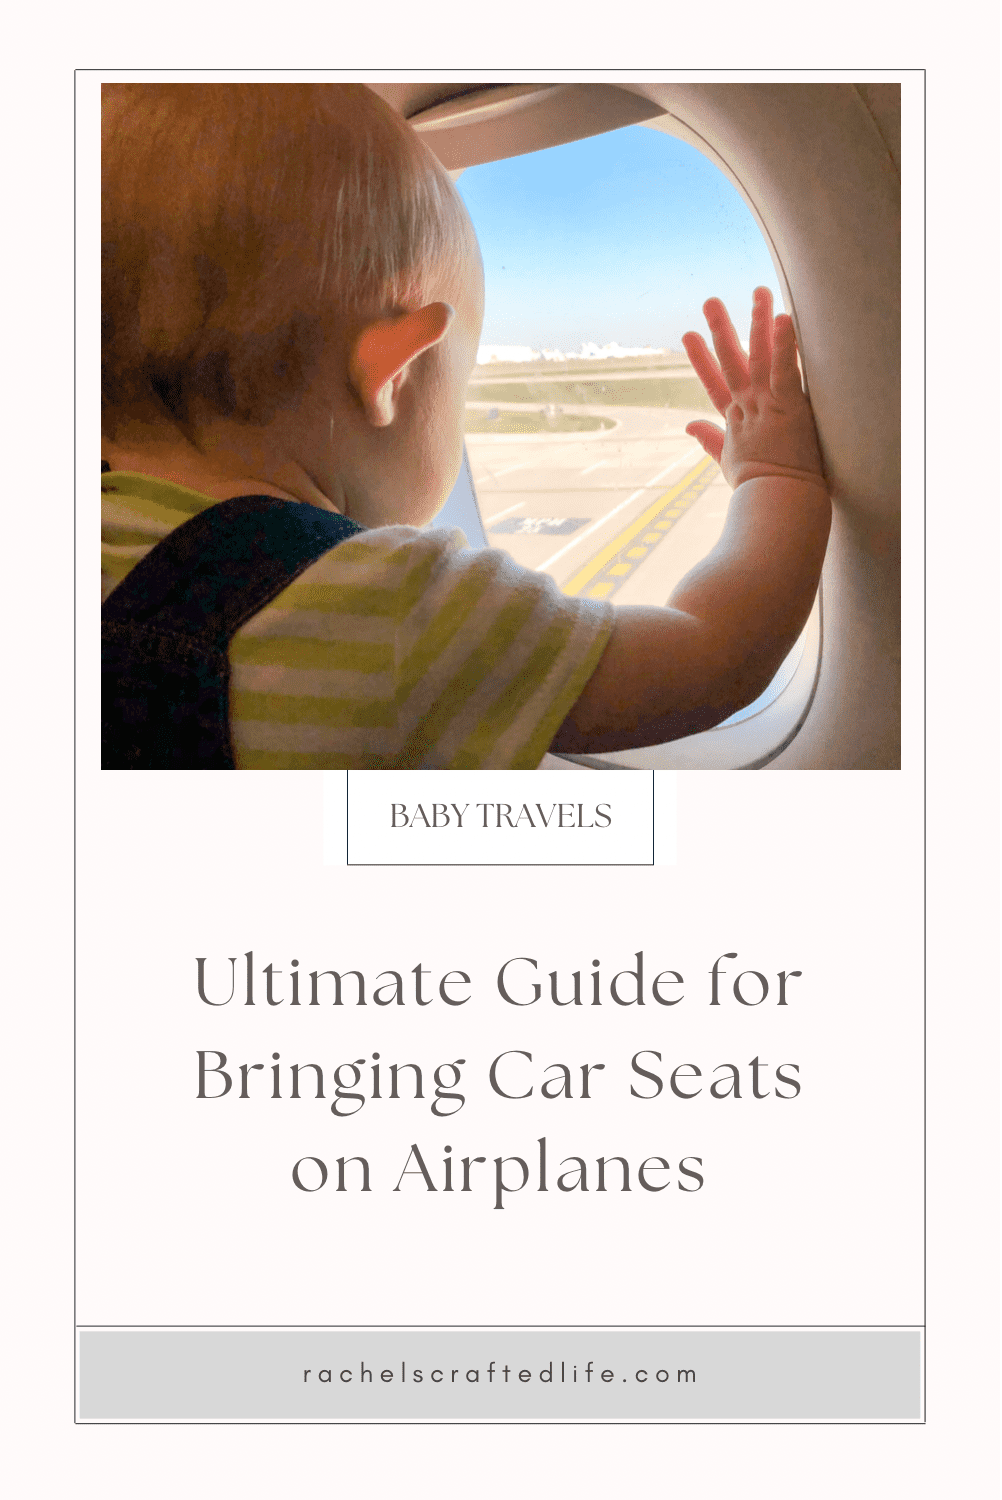 You are currently viewing Ultimate Guide for Bringing Car Seats on Airplanes